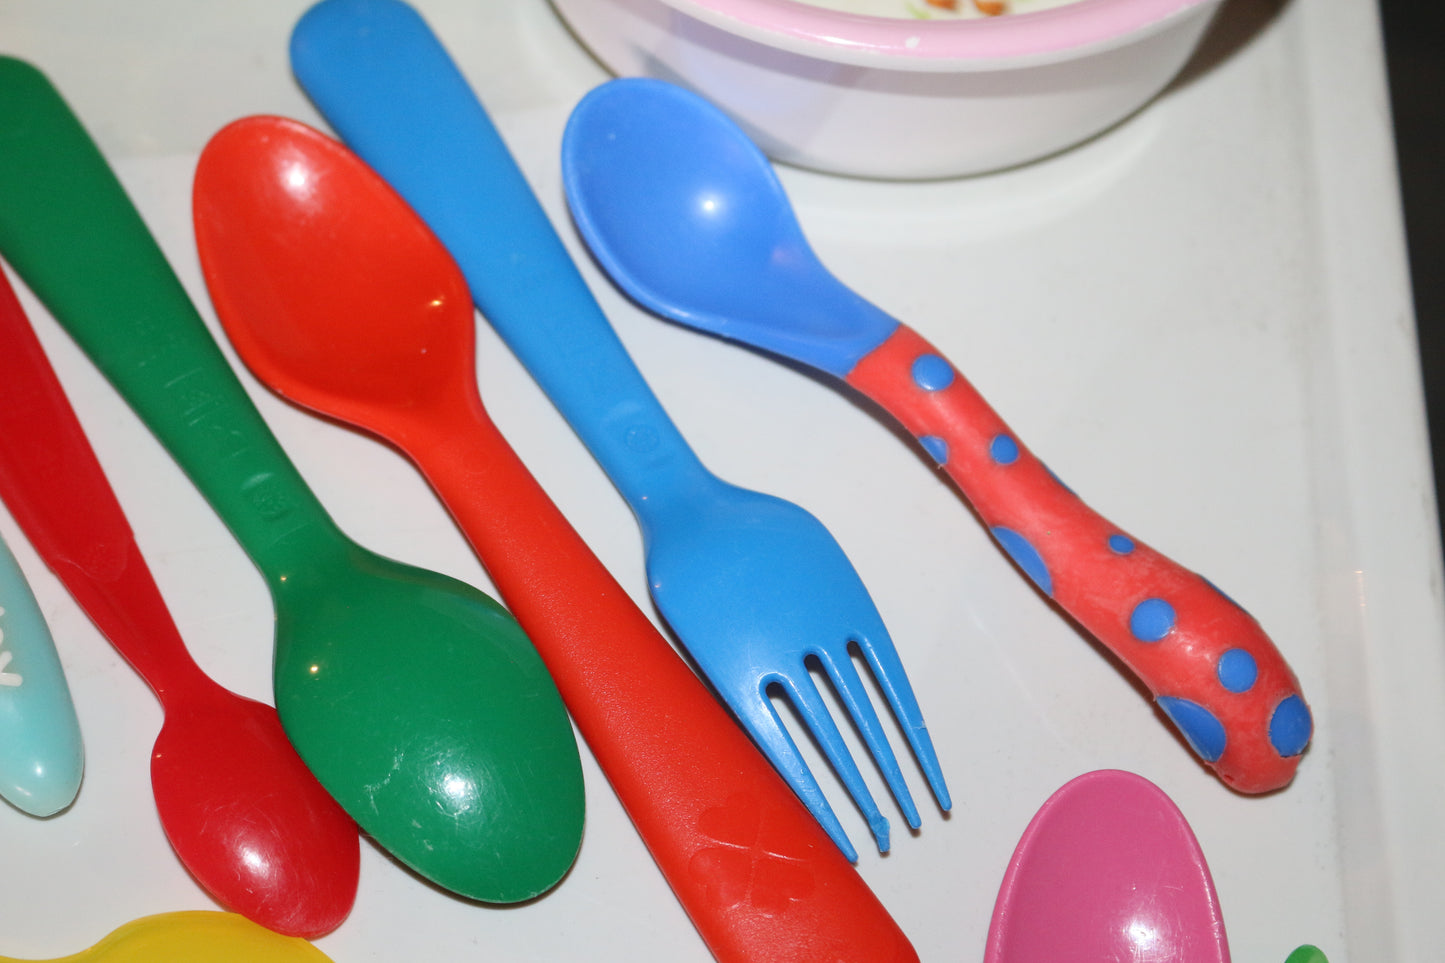 Cutlery huge lot mixed Knives,Forks, Spoons Blue, Green toys for kids & 1 bowl